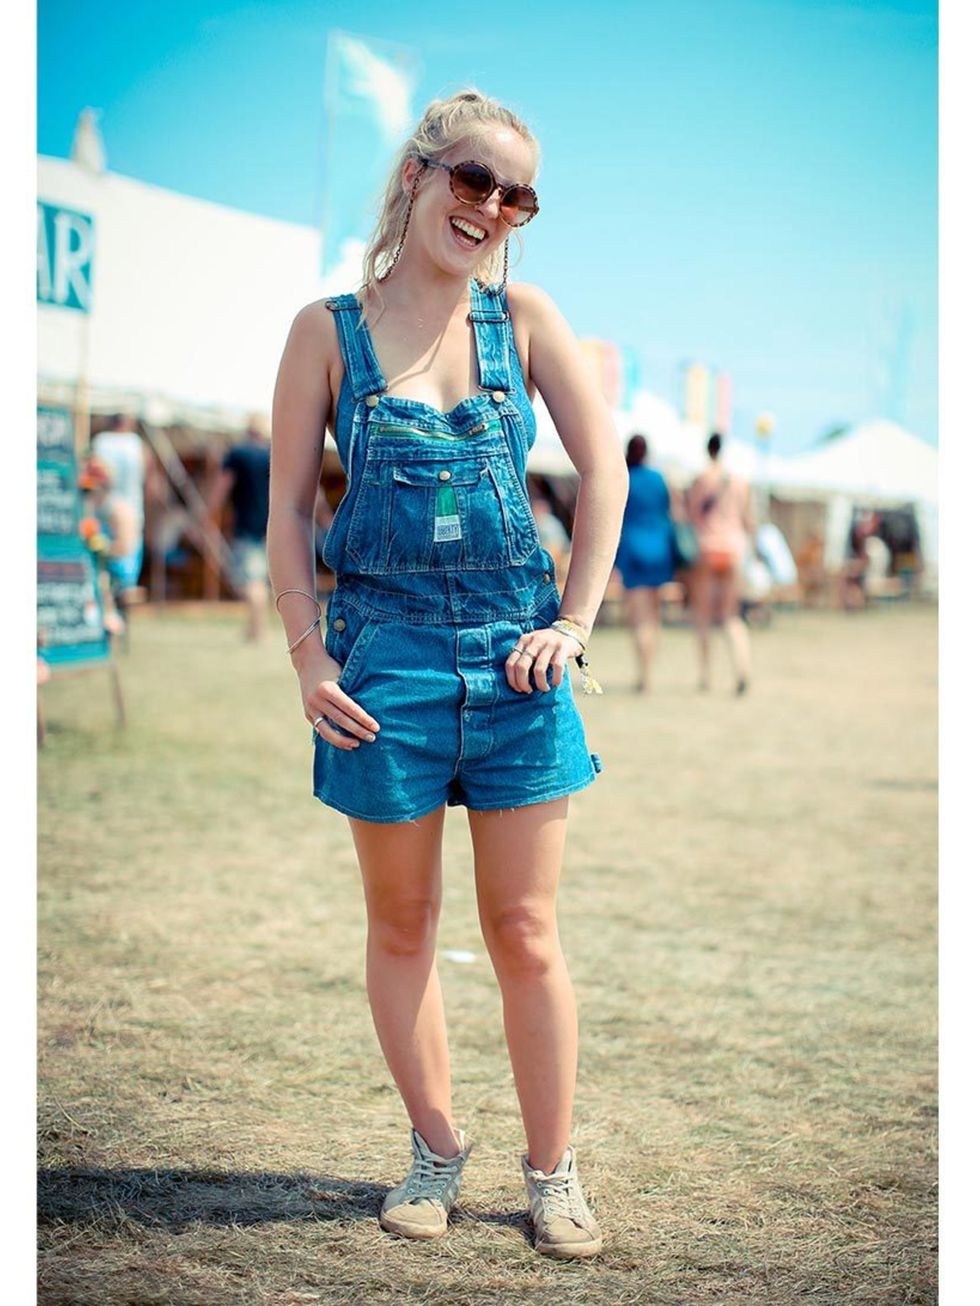 Sophie wears Liberty dungarees, Gola trainers, ASOS sunglasses.